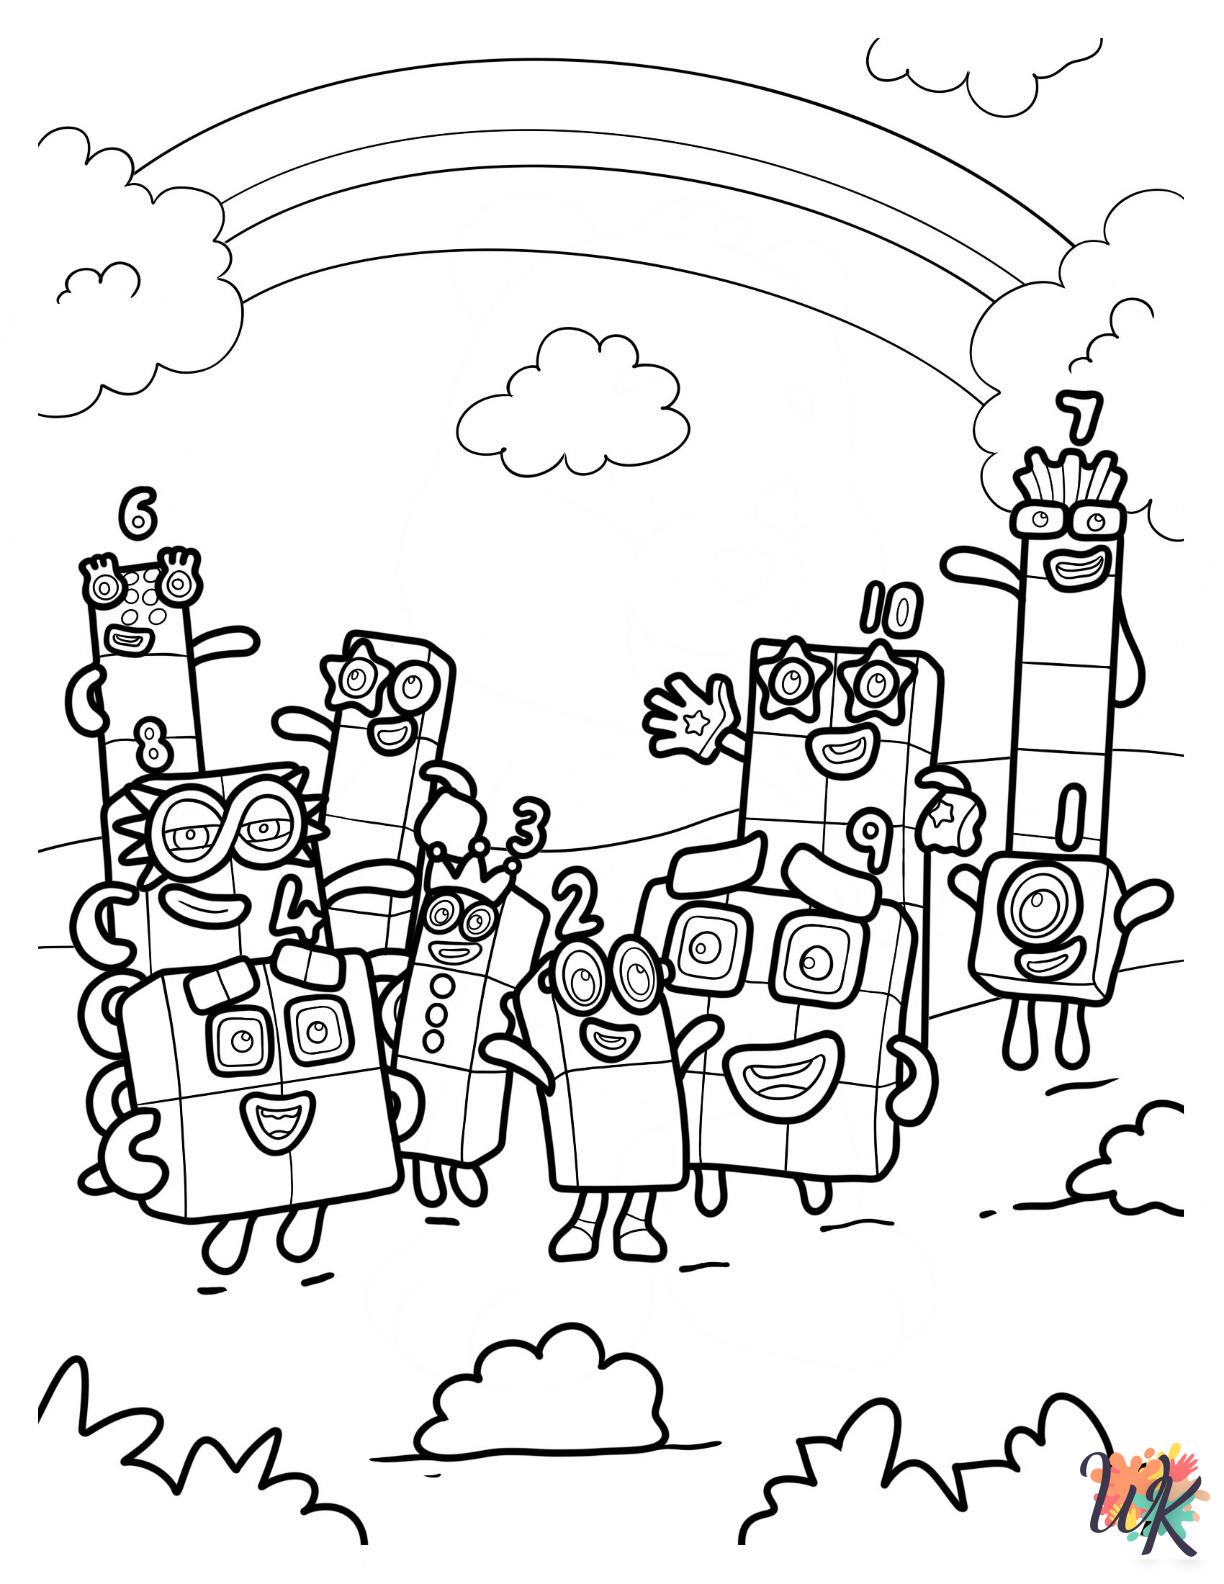 Numberblocks coloring pages for kids